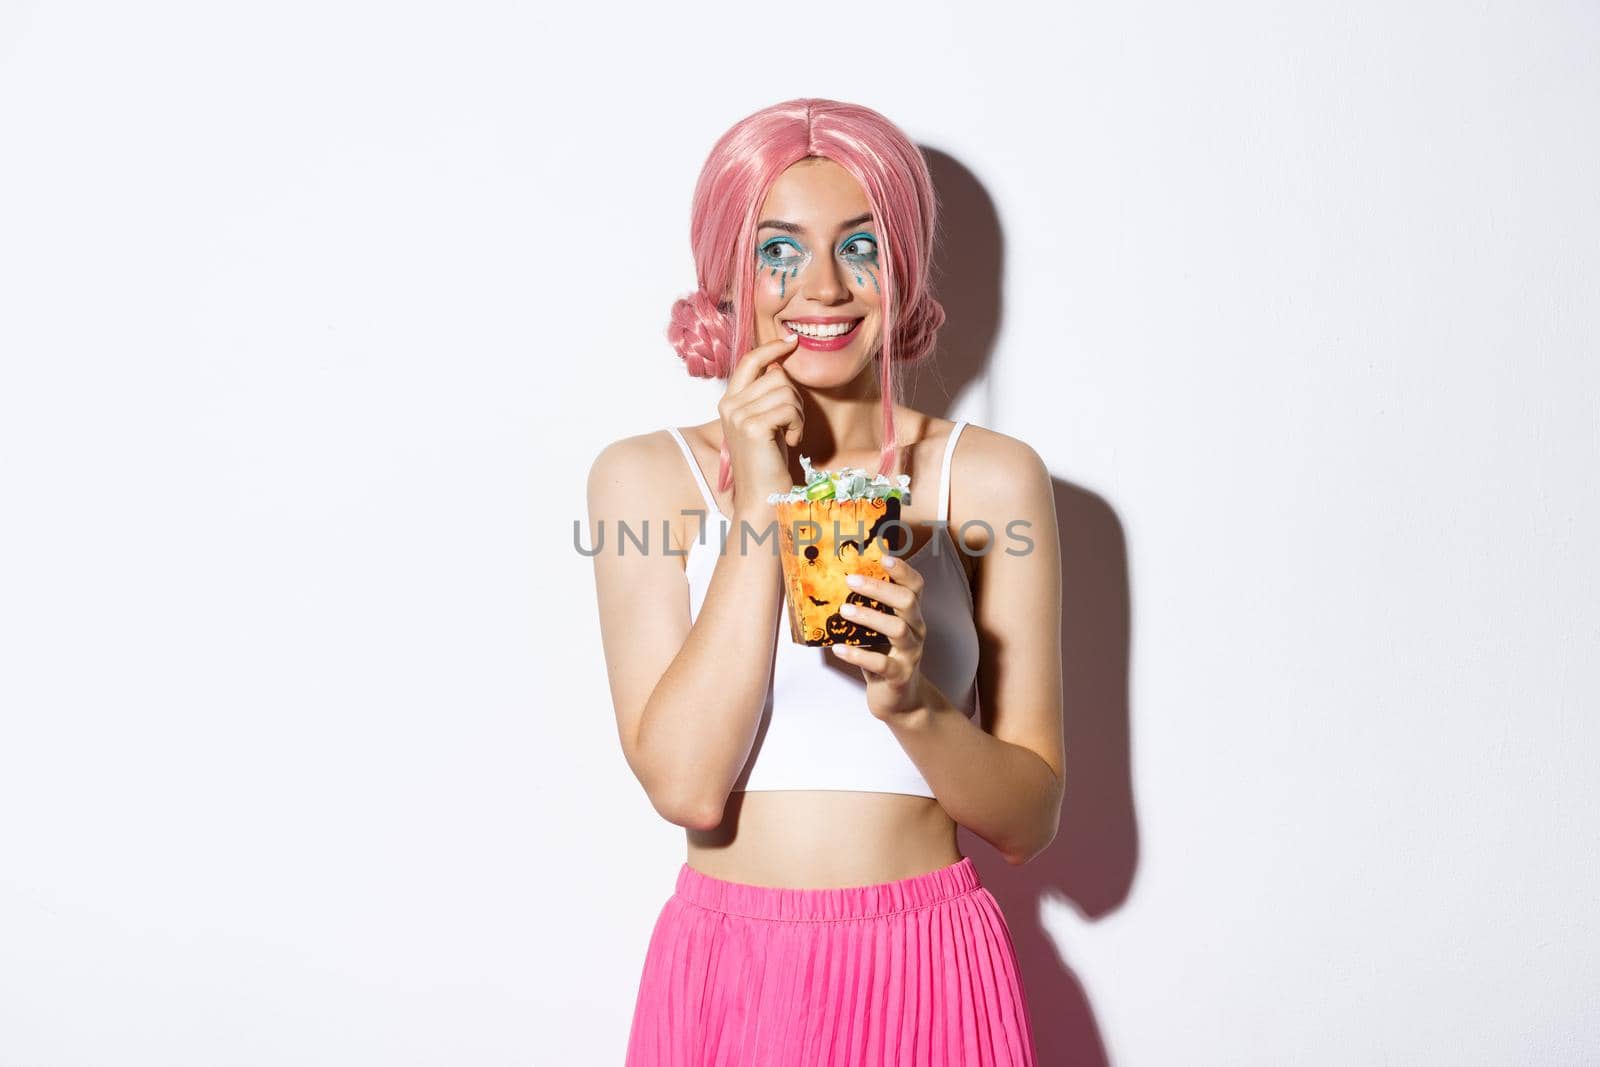 Portrait of thoughtful smiling girl in pink wig, thinking about trick or treat while holding candies, celebrating halloween, standing over white background.